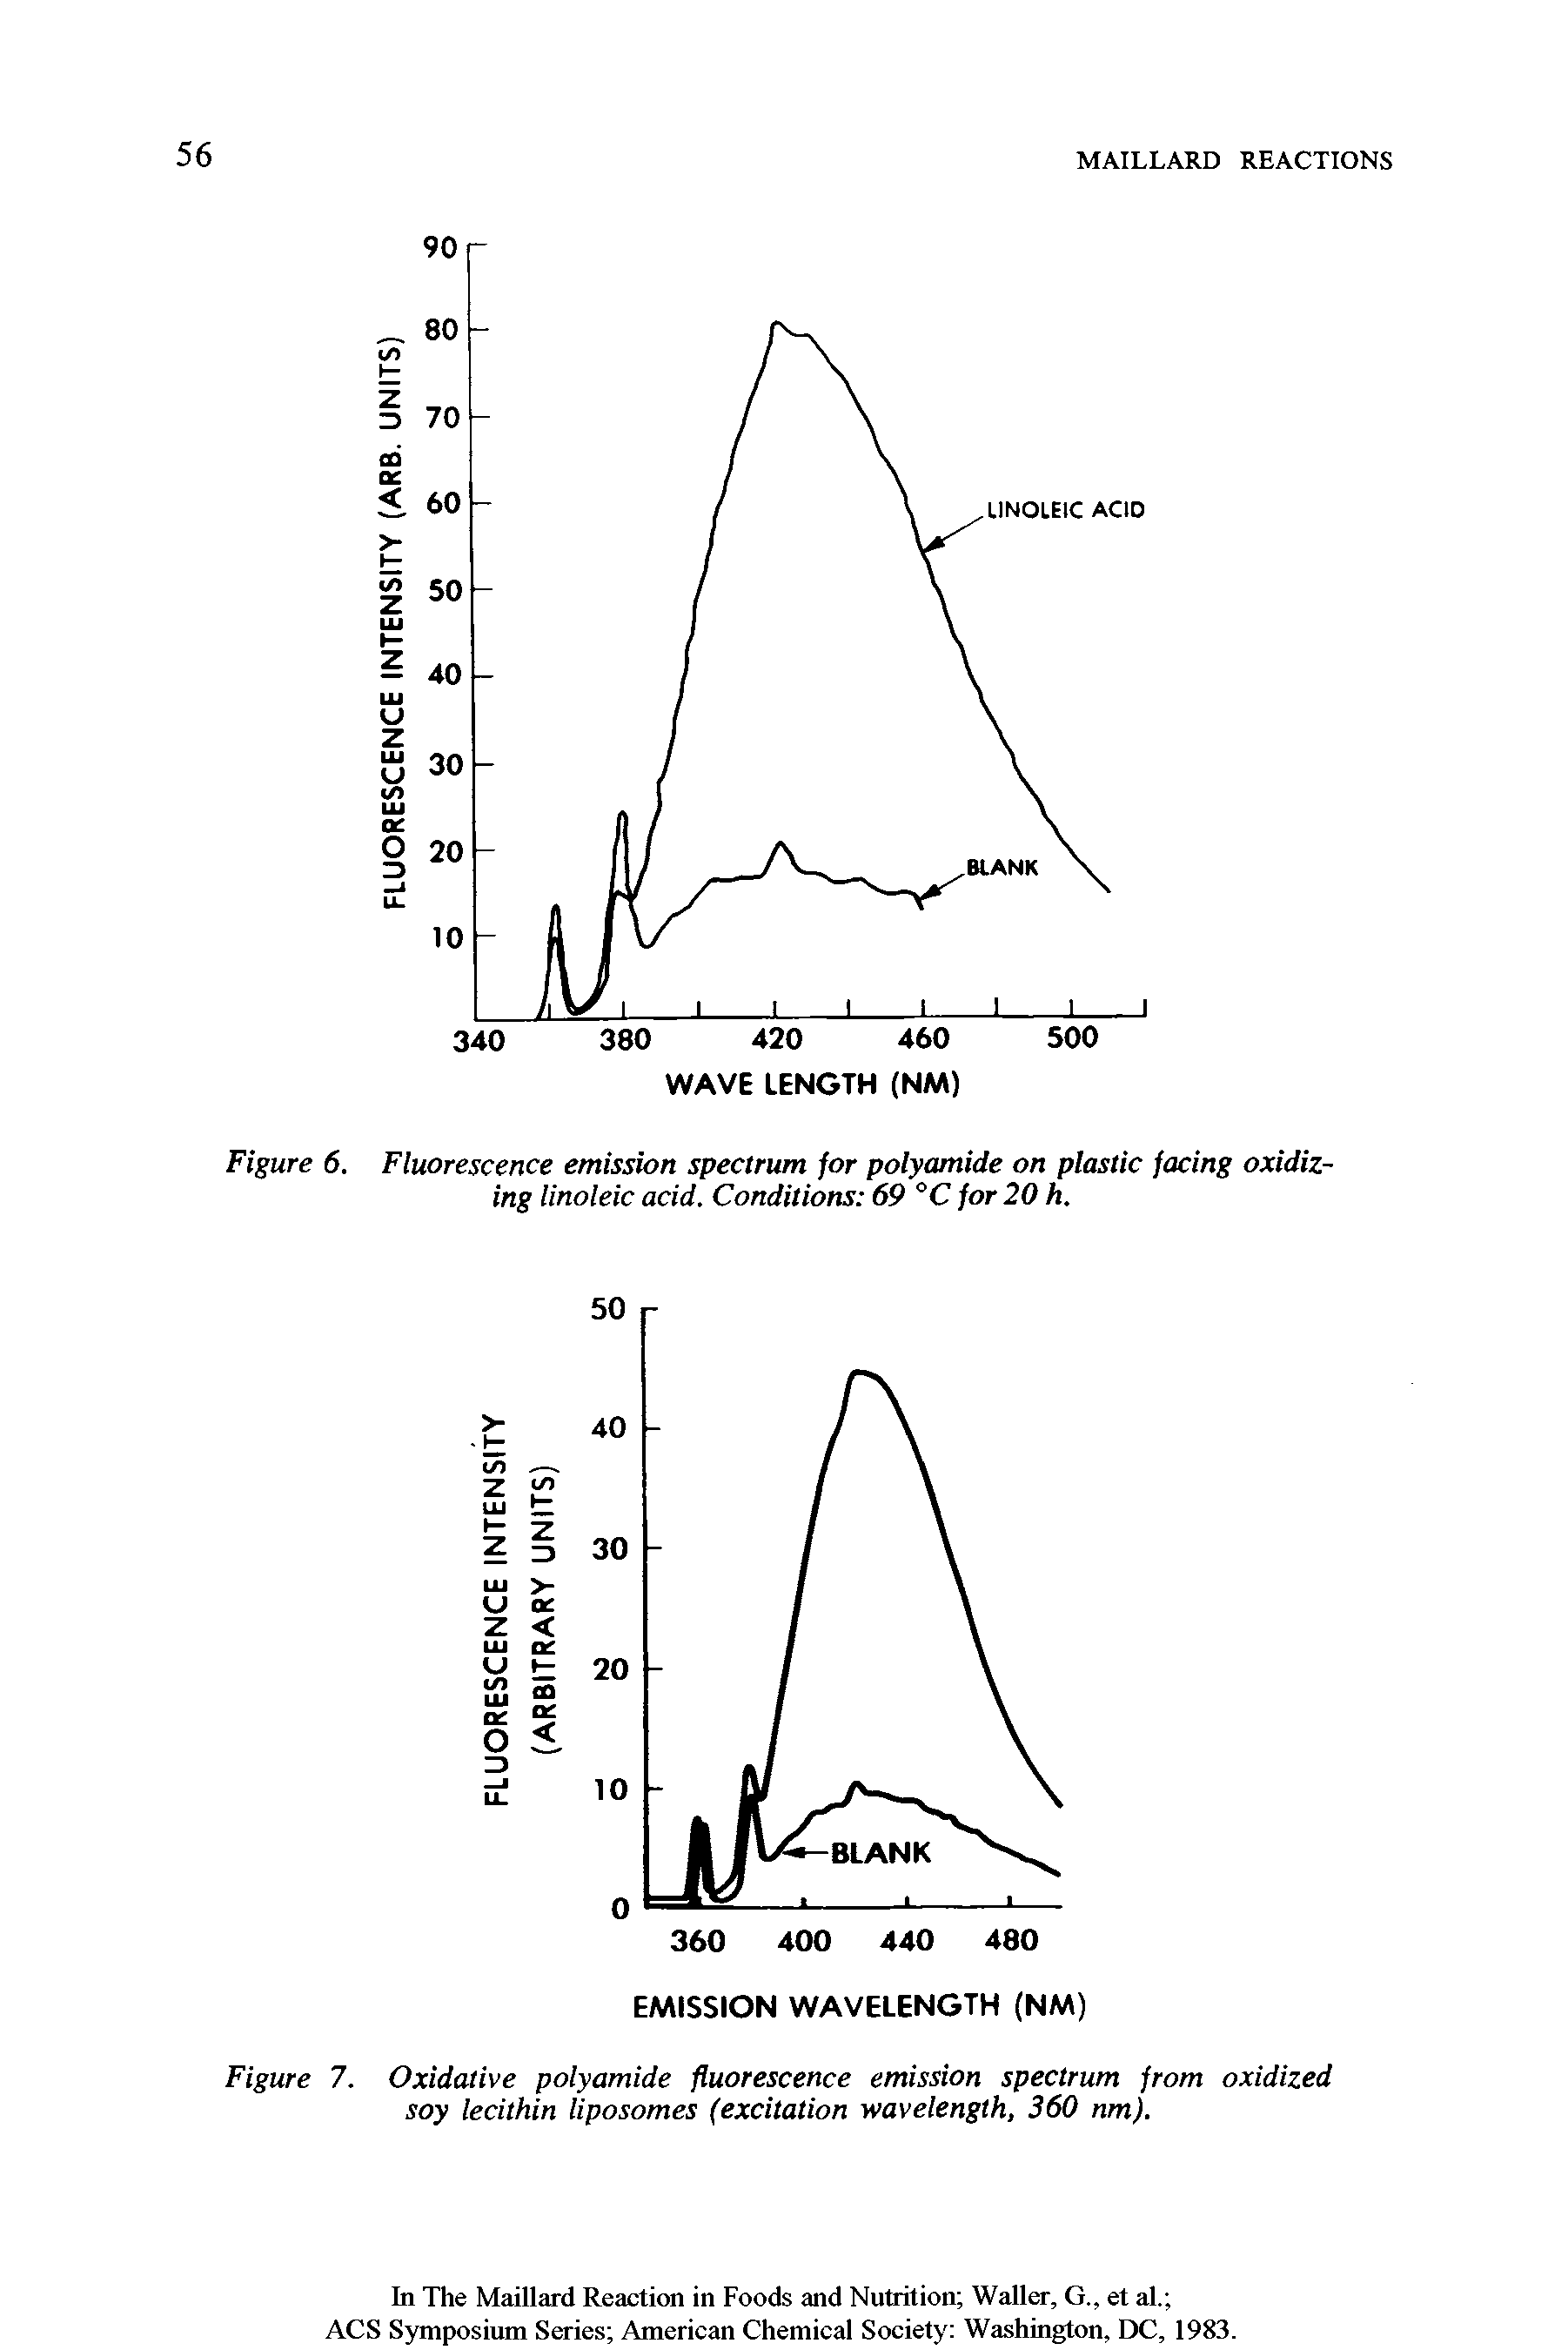 Figure 6. Fluorescence emission spectrum for polyamide on plastic facing oxidizing linoleic acid. Conditions 69 °C for 20 h.